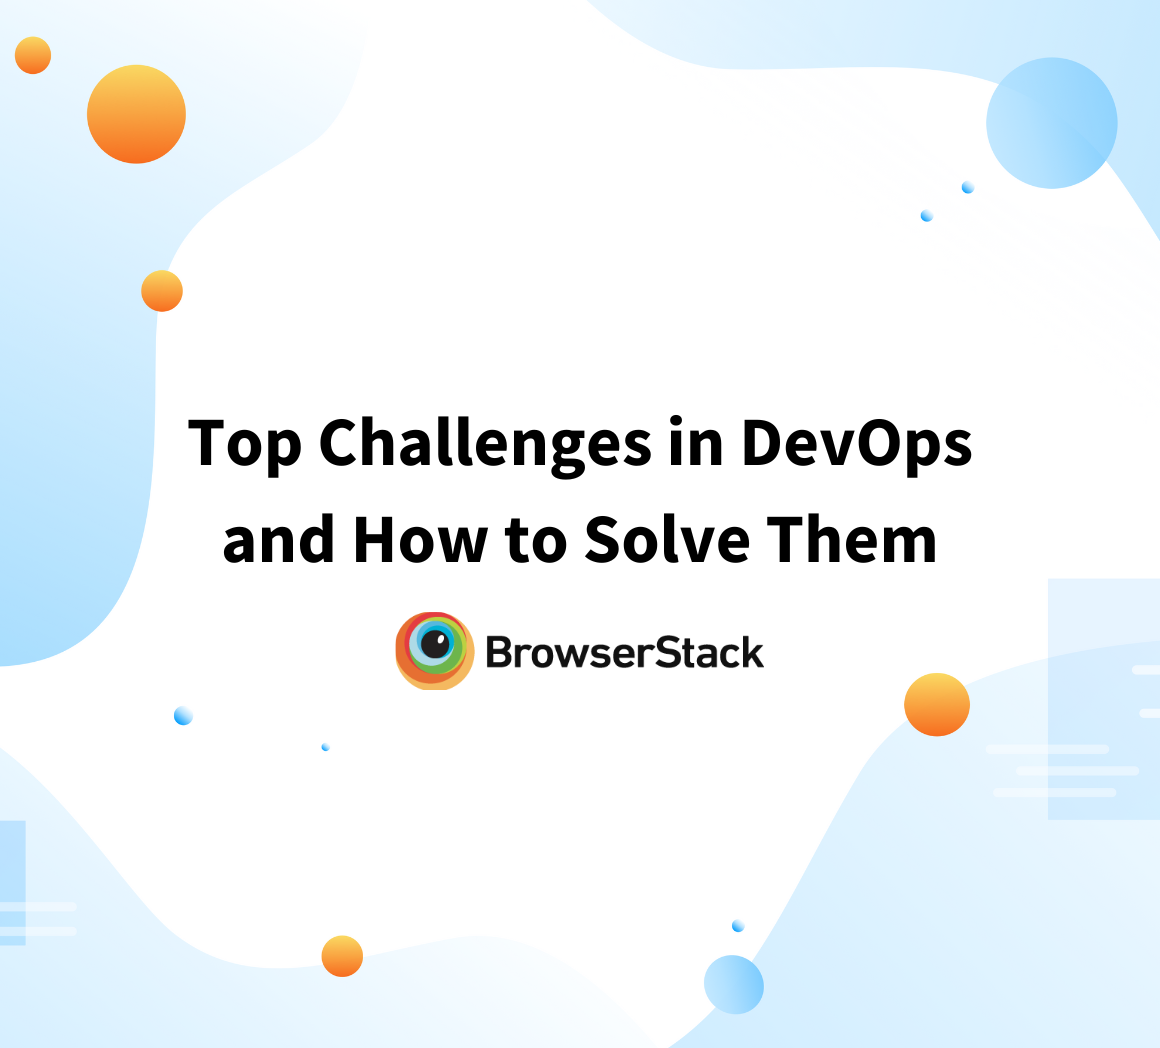 Top Challenges in DevOps and How to Solve Them